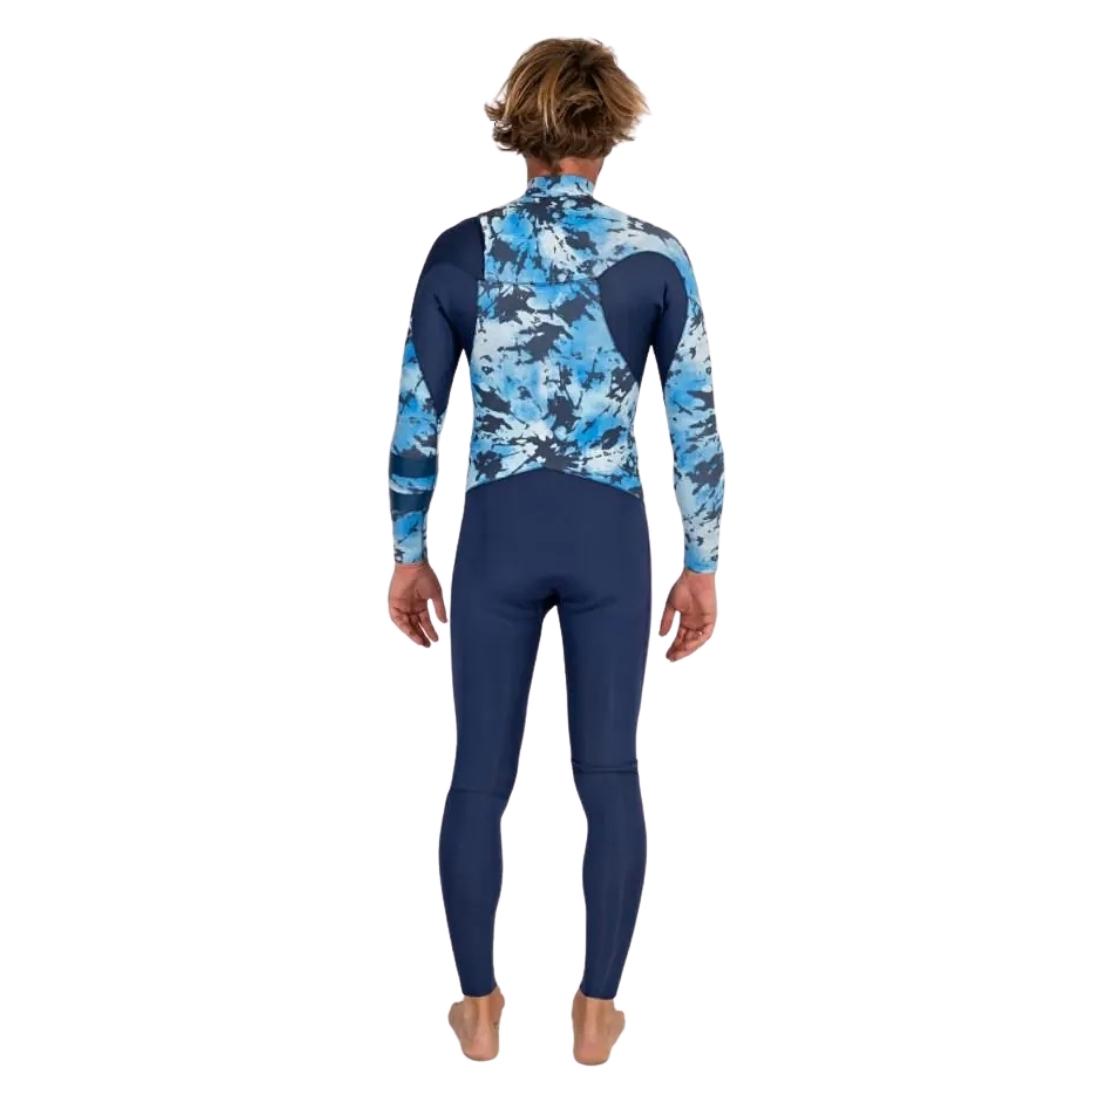 Hurley Mens Advantage Plus 3/2mm Printed Wetsuit - Iodine Blue - Mens Full Length Wetsuit by Hurley